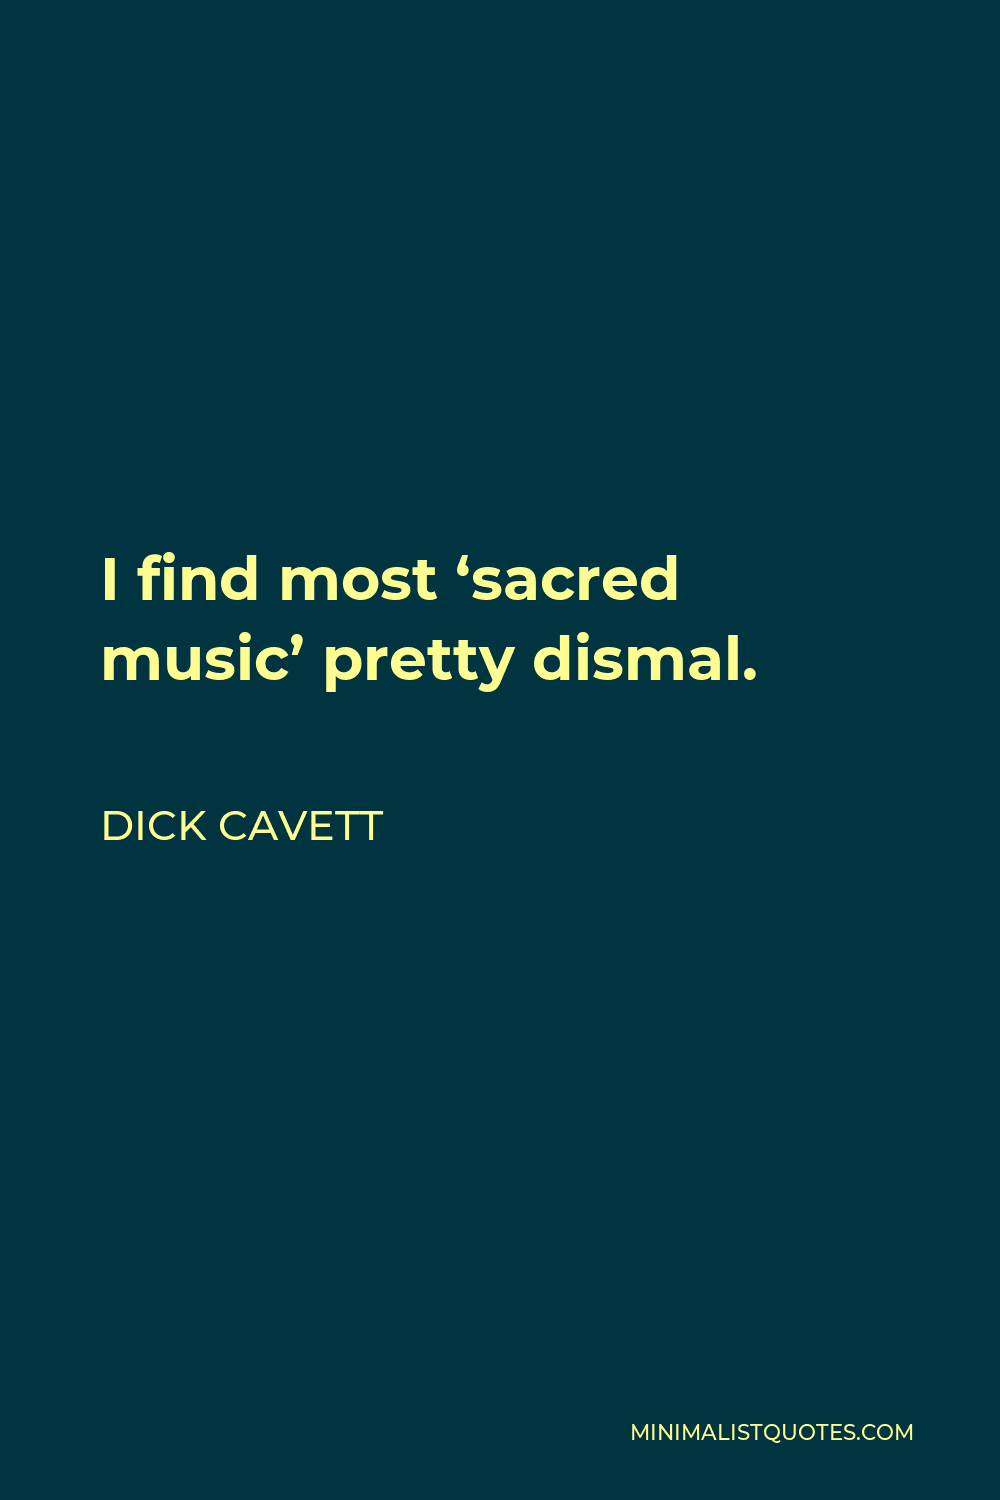 Dick Cavett Quote - I find most ‘sacred music’ pretty dismal.